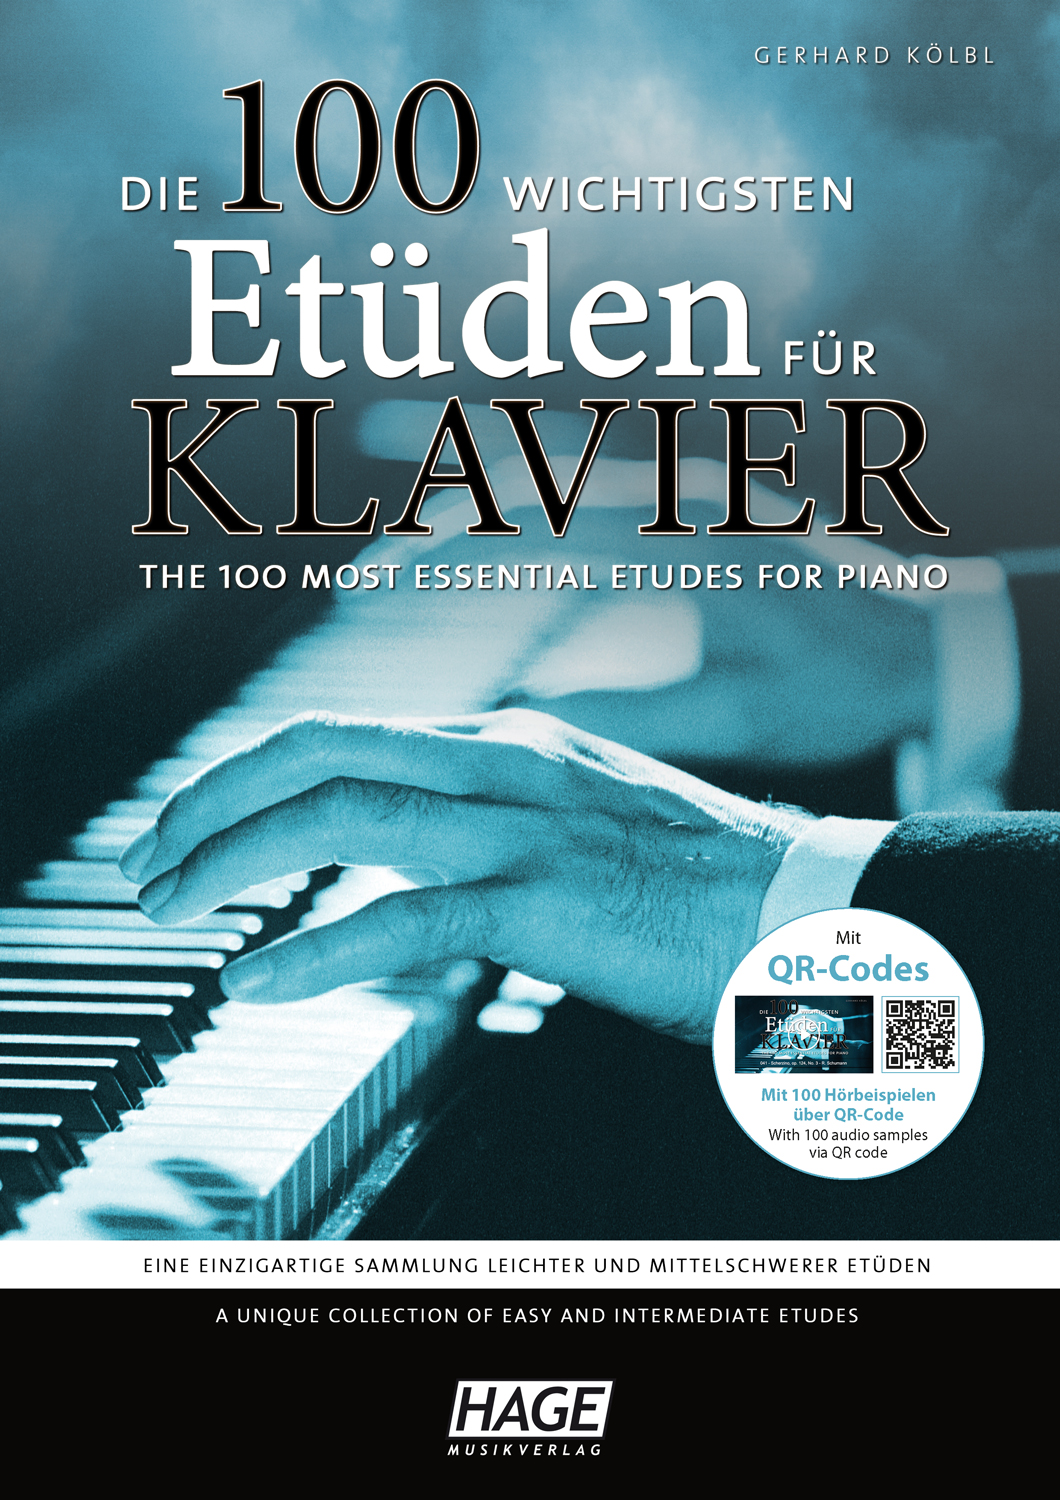 The 100 most essential etudes for piano